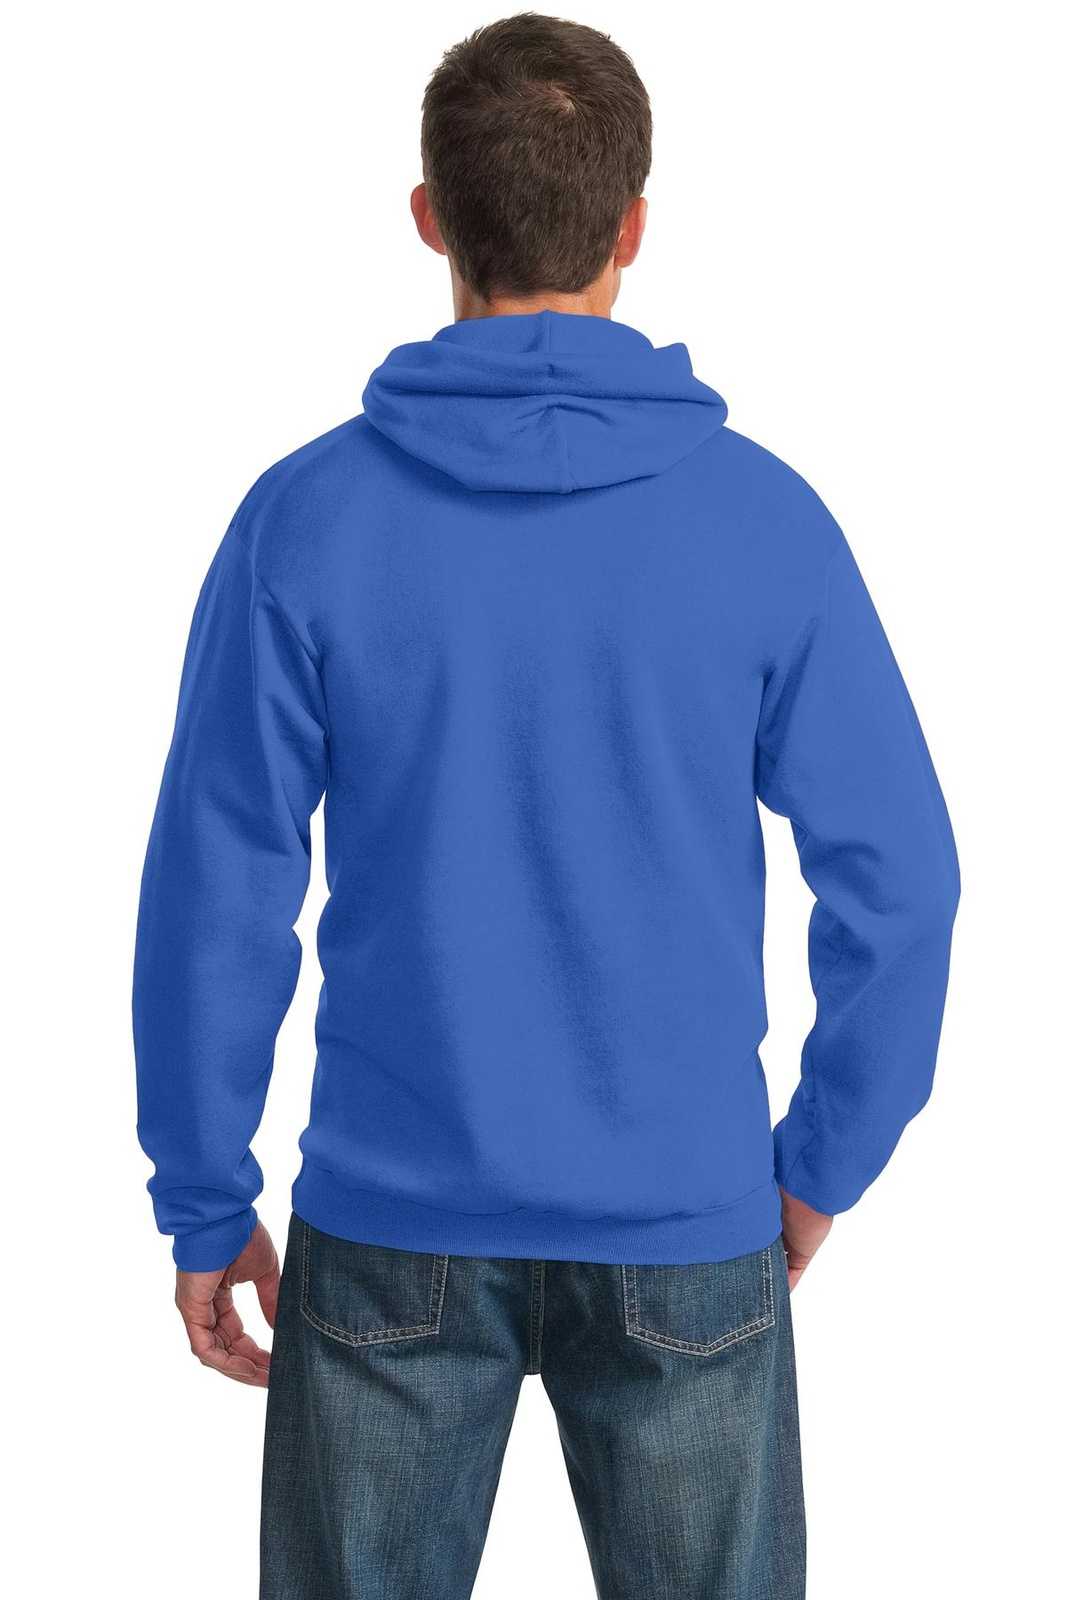 Port & Company PC90H Essential Fleece Pullover Hooded Sweatshirt - Royal - HIT a Double - 1